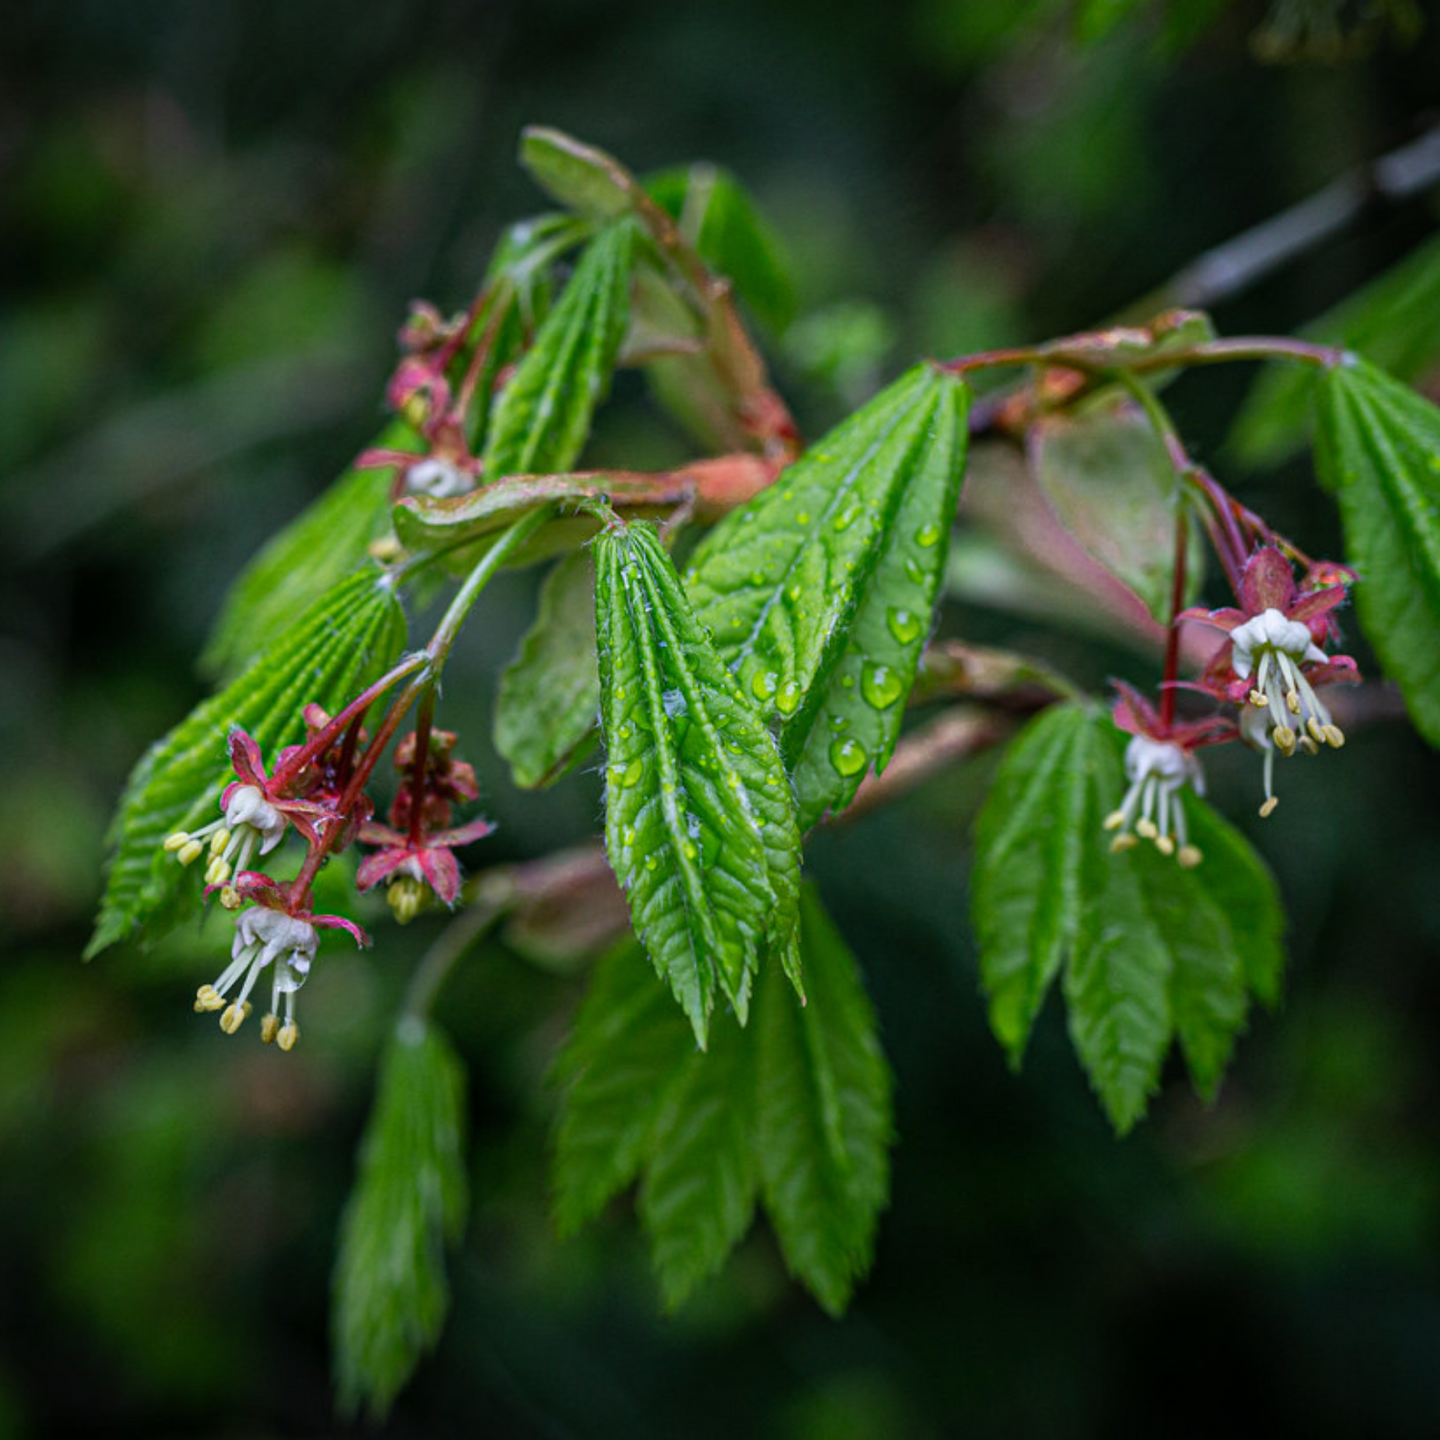 Young leaves and flowers of Vine Maple (Acer circinatum). Another stunning Pacific Northwest native tree available at Sparrowhawk Native Plants Nursery in Portland, Oregon.